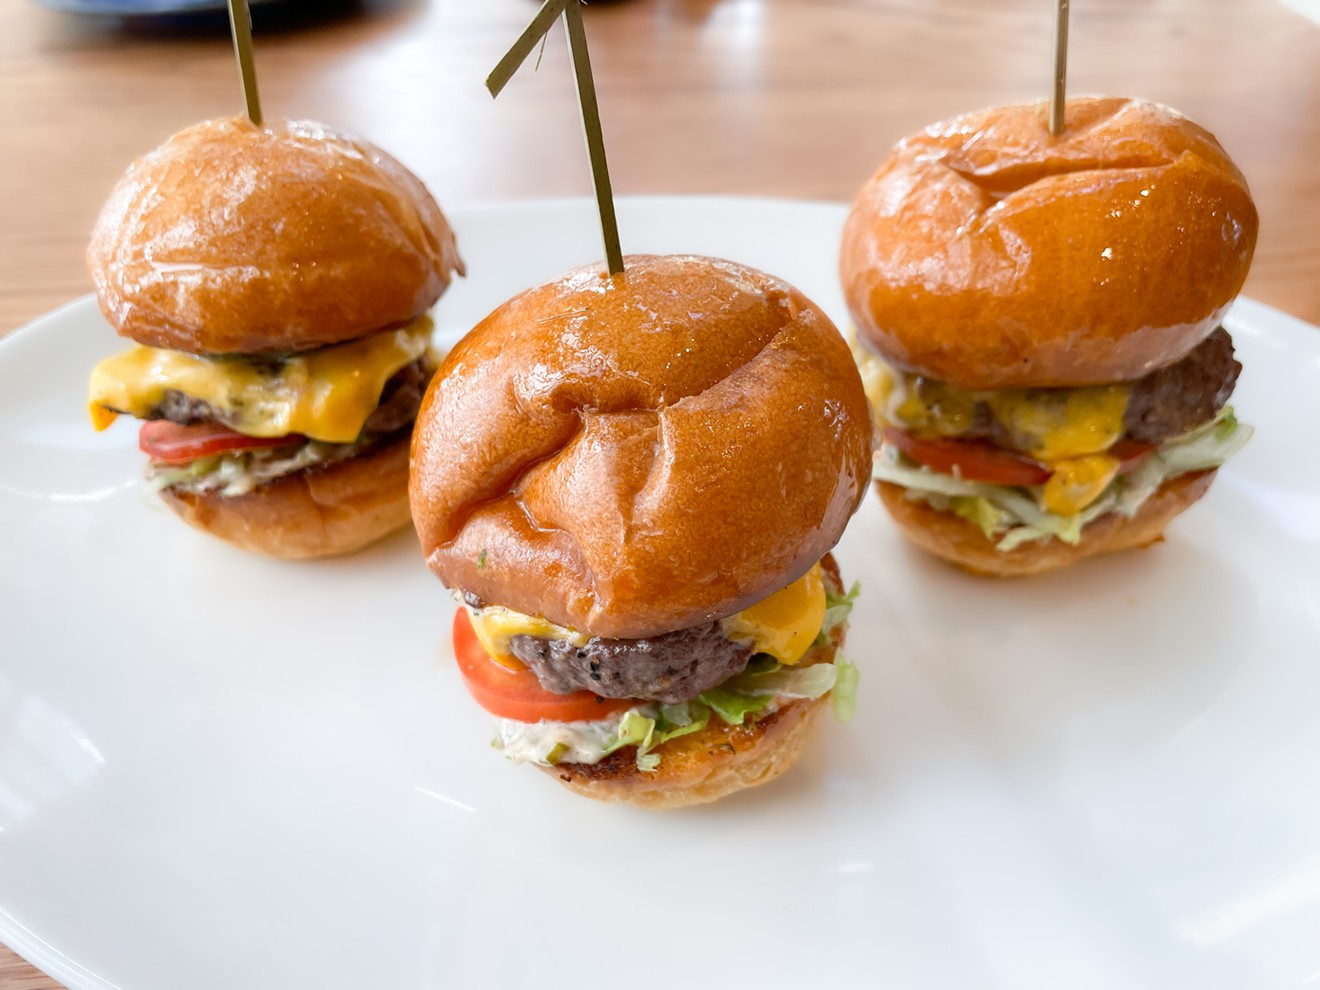 Wagyu sliders at The Finch.